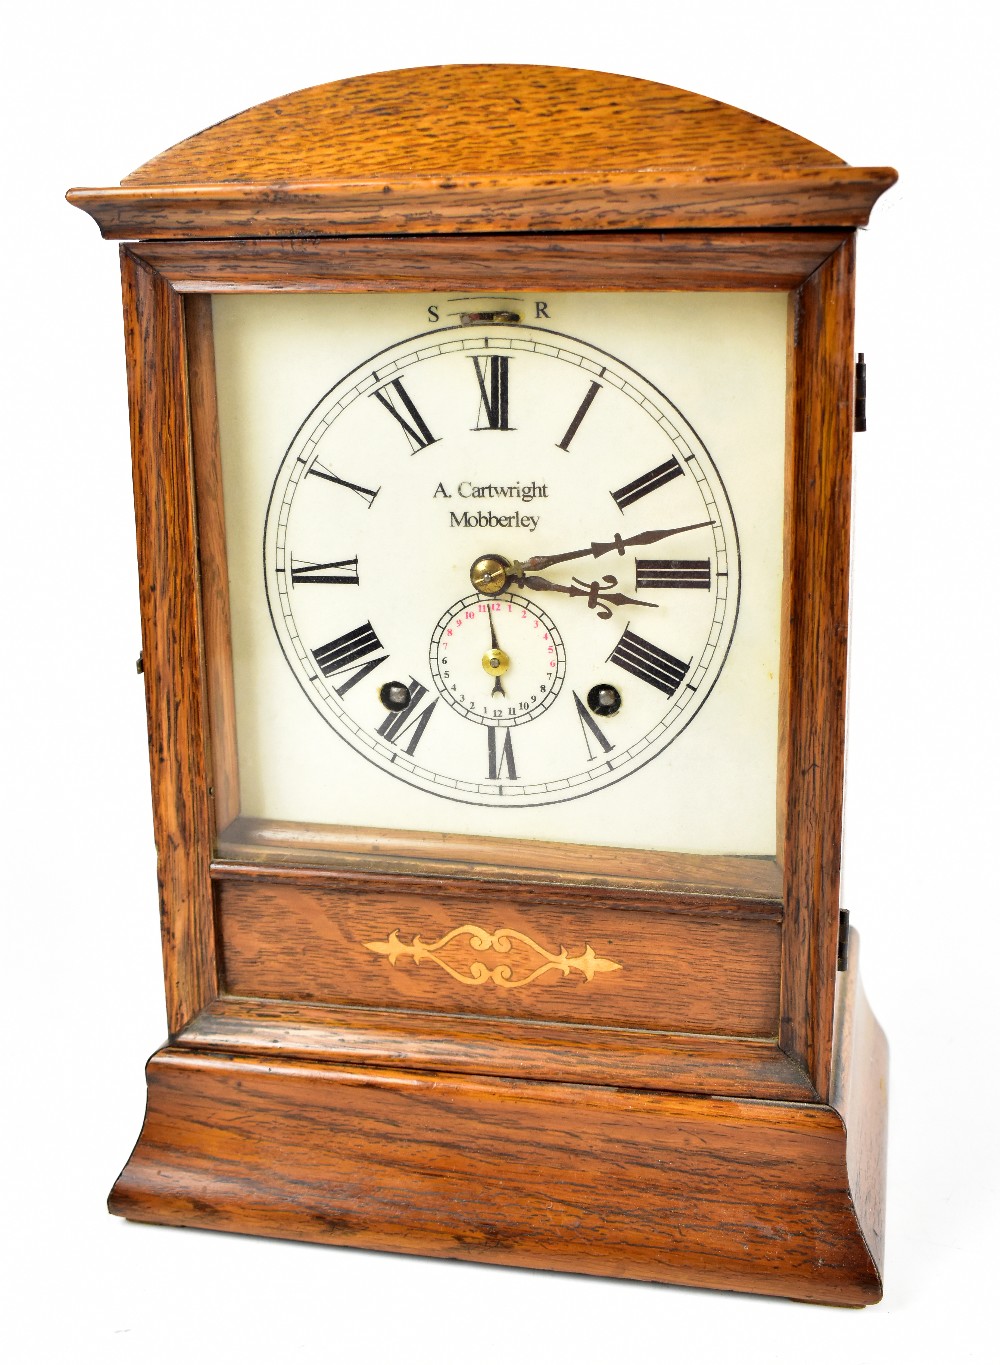 An Edwardian oak mantel clock with later printed dial set with Roman numerals, inscribed 'A.